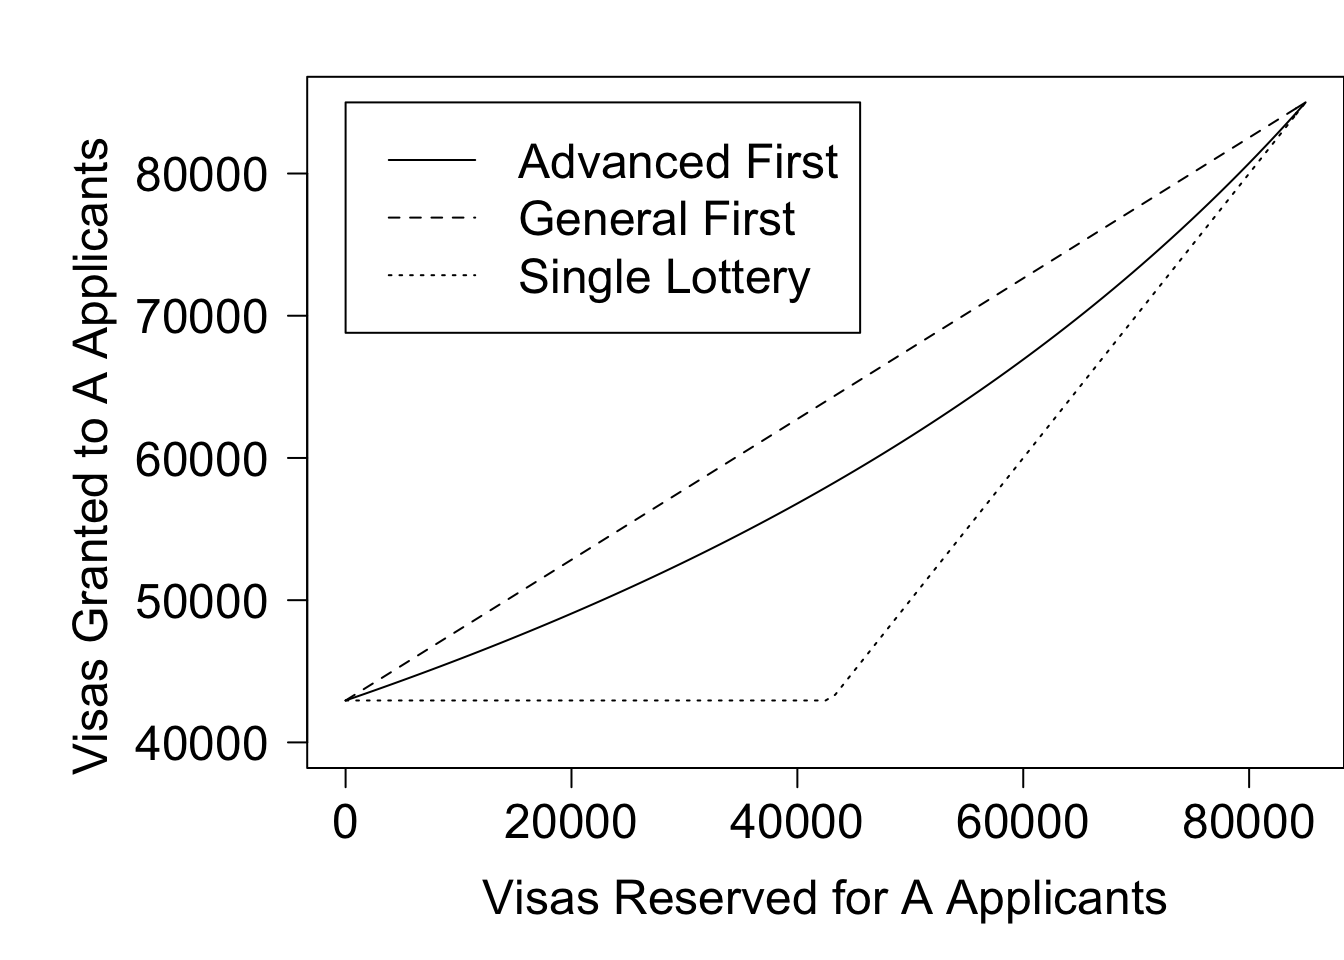 Comparison of lottery systems, varying the quota for A applicants. Changing between systems has the same effect as a significant shift in the quota. For example, running the general lottery first with a quota of 35,000 is approximately equivalent to using a single lottery with a quota of 60,000.